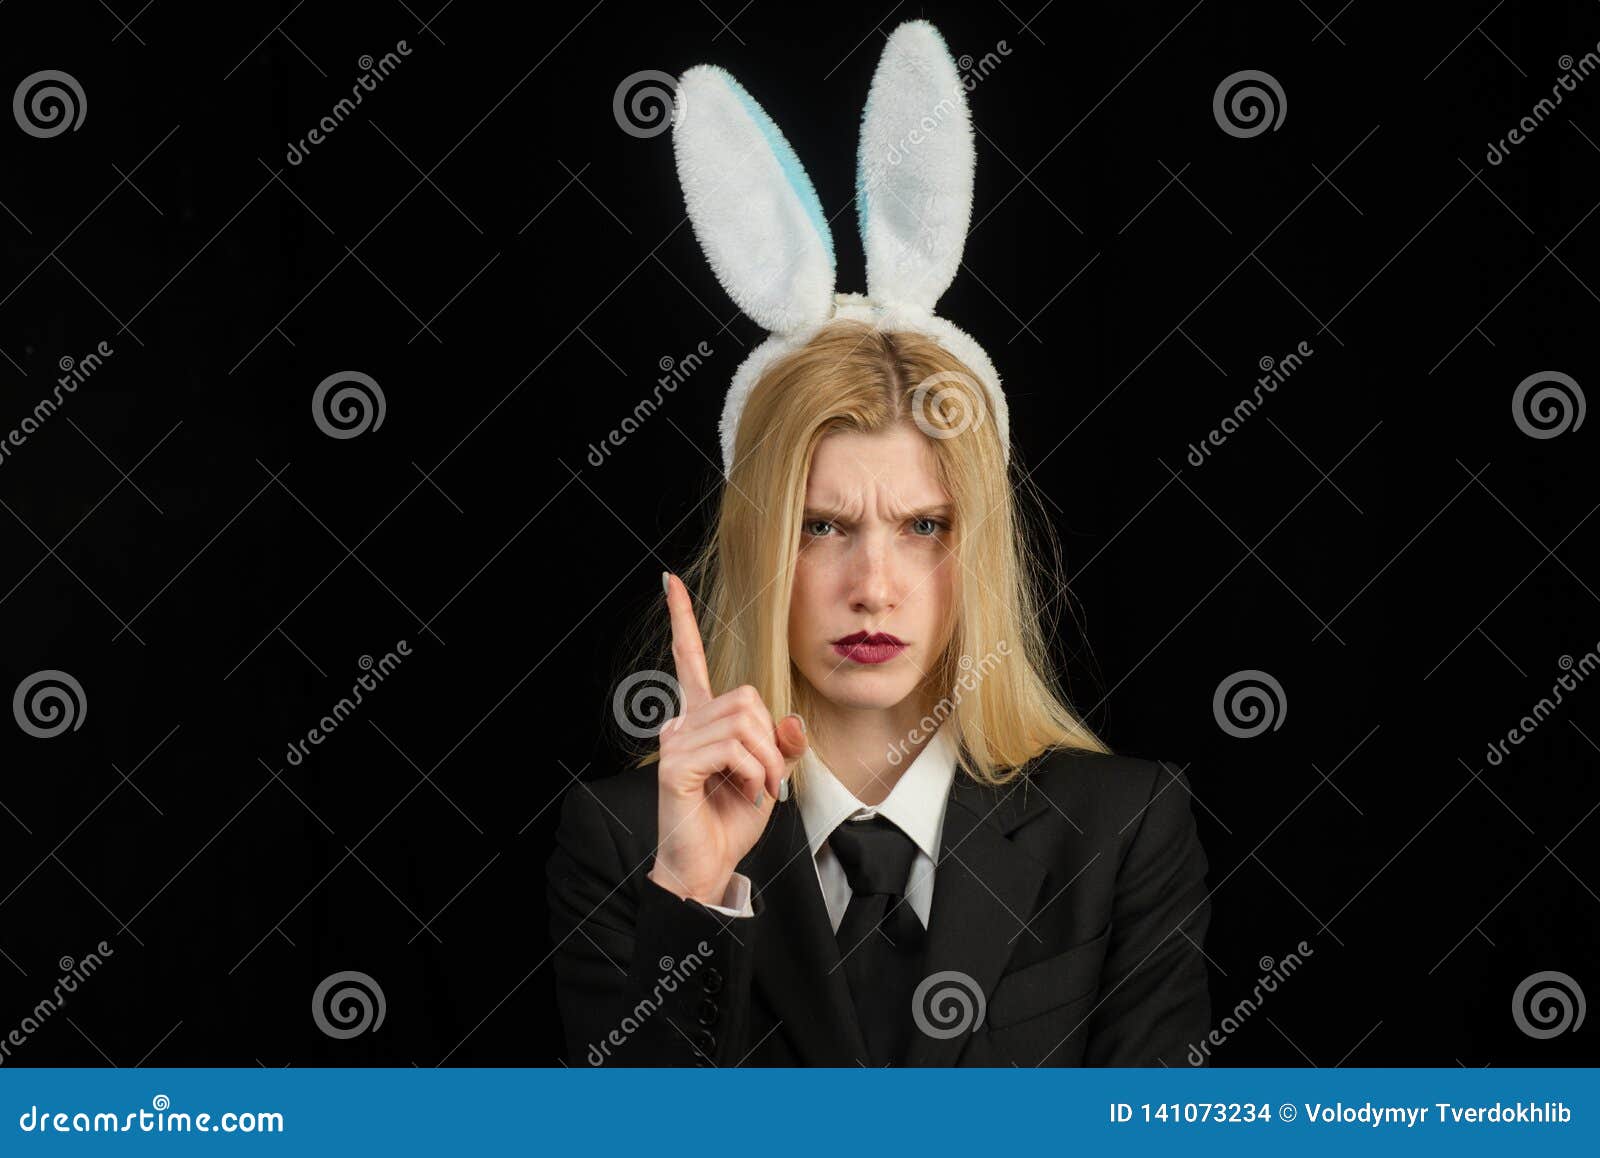 Blonde Girl With Lace Bunny Ears. Model Dressed In Costume ...